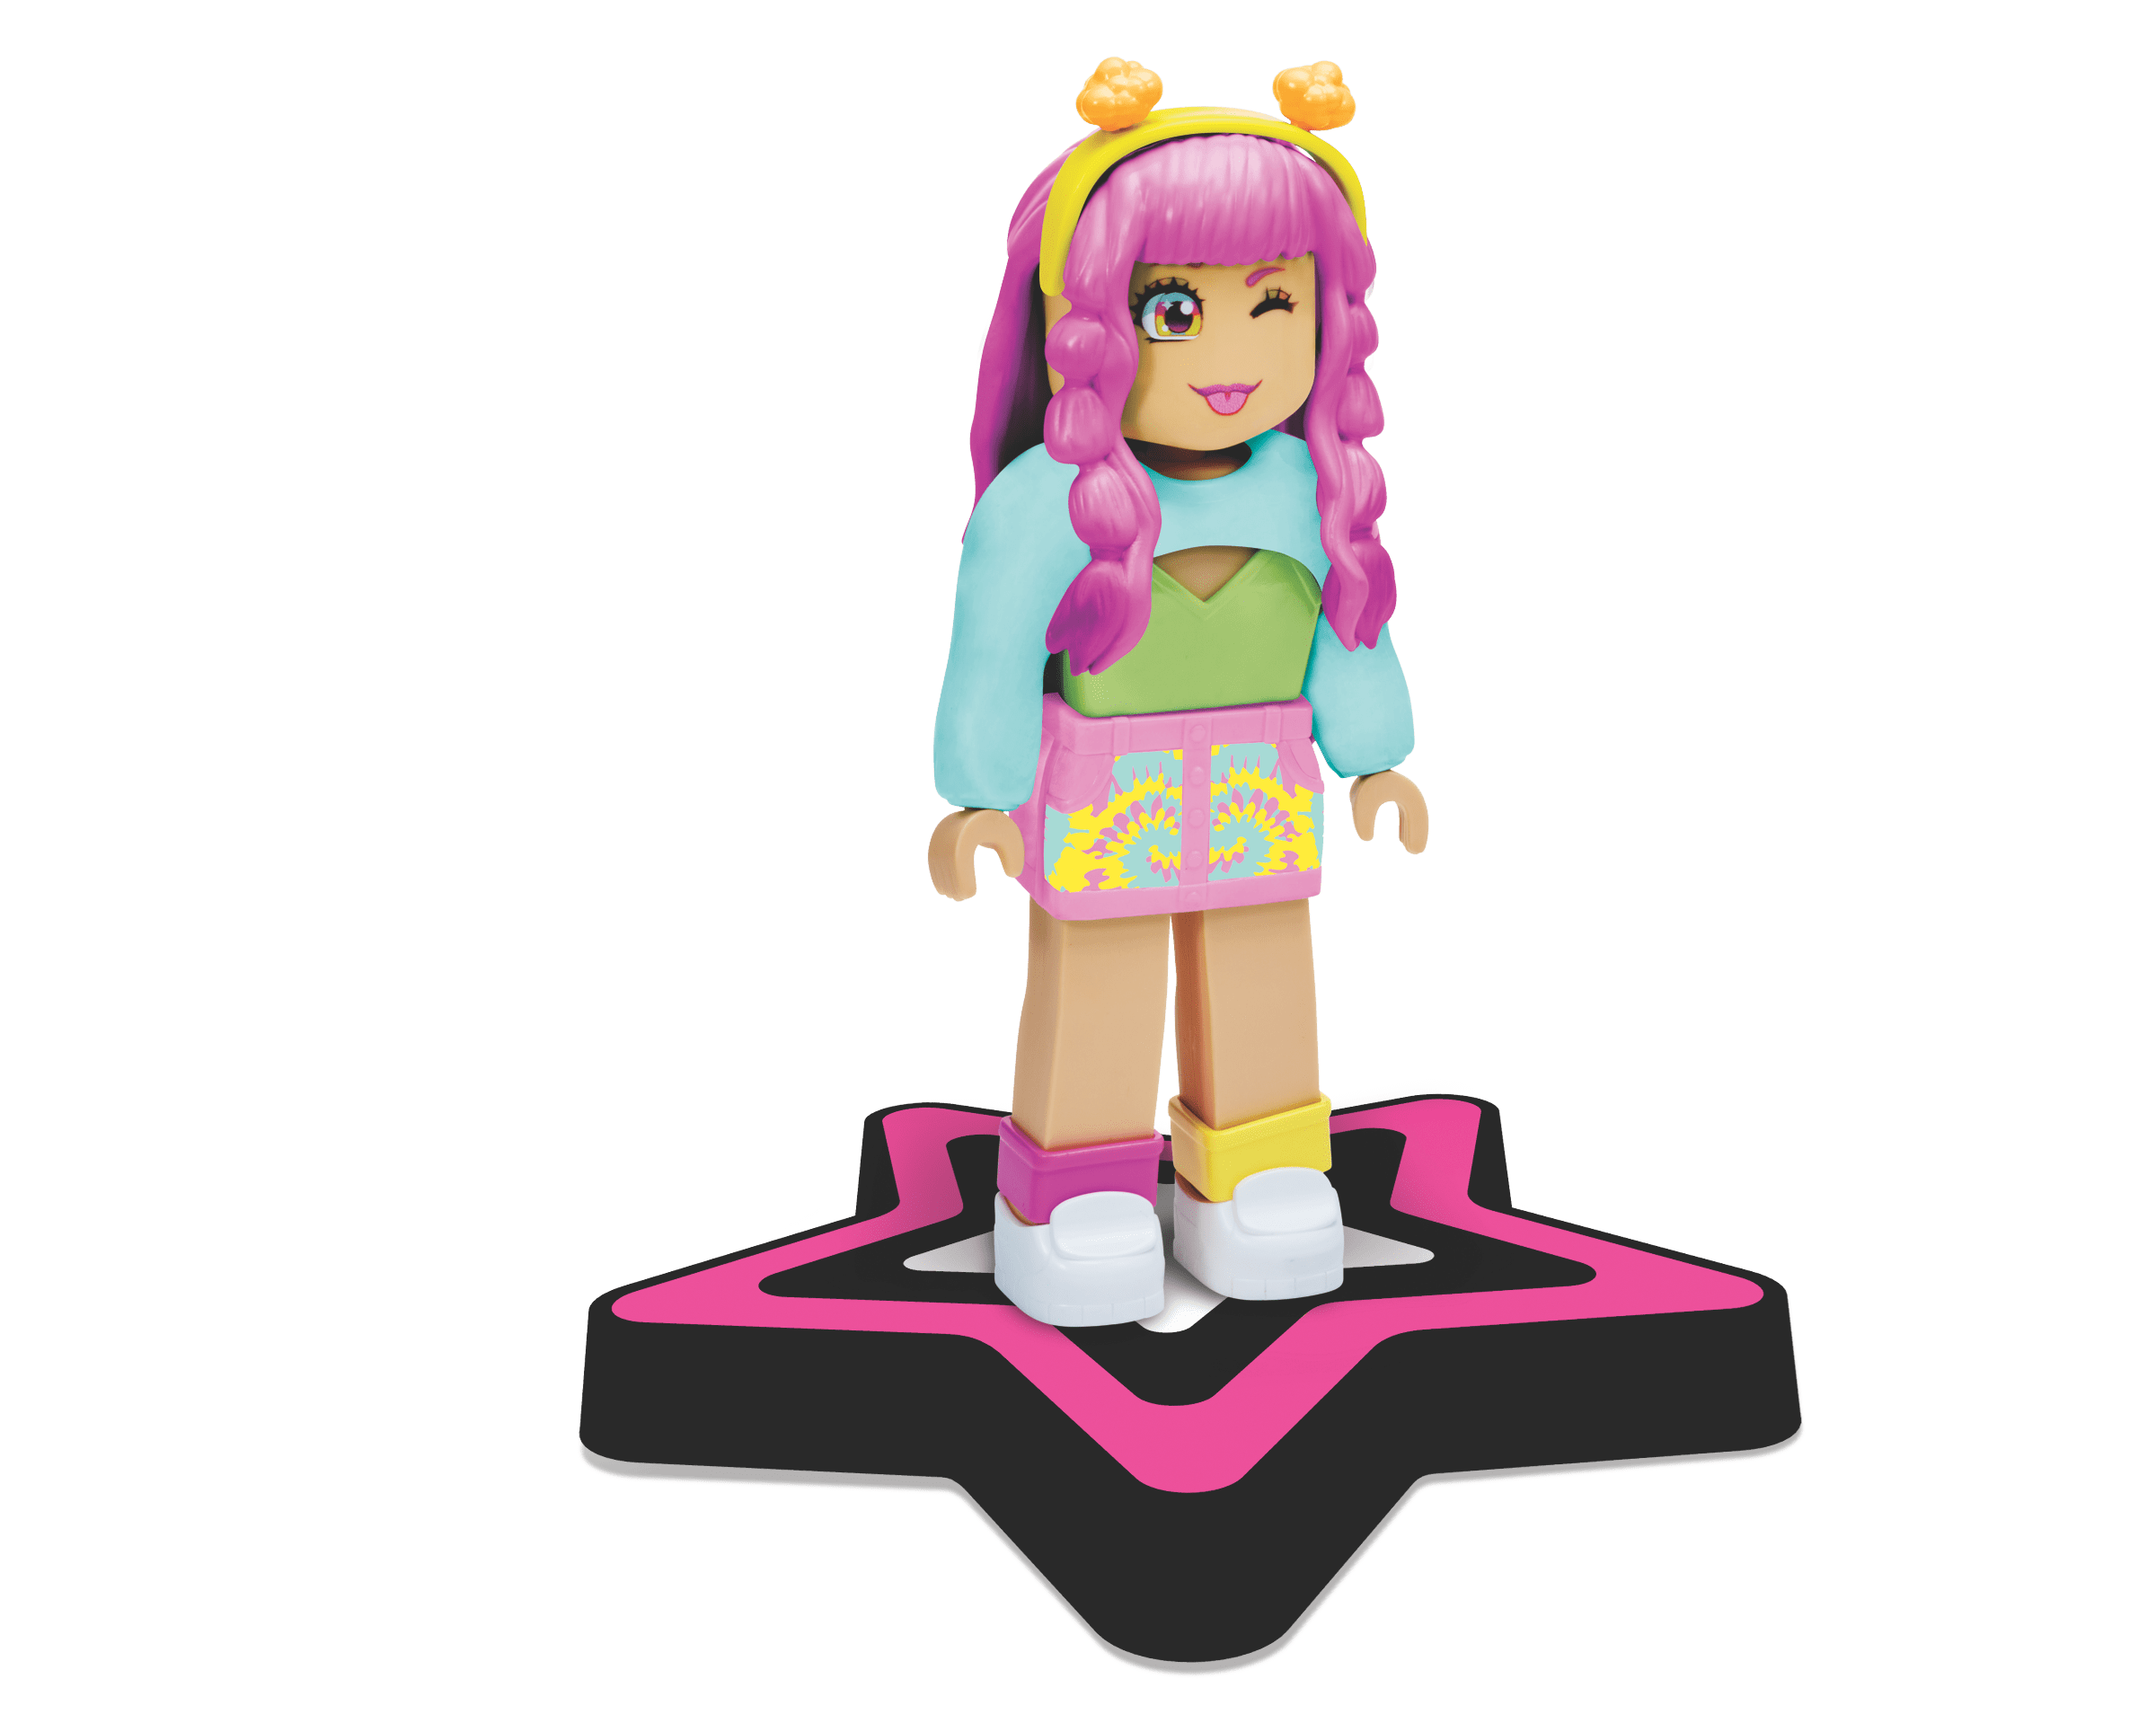  My Avastars KawaiiPie^^ – 11 Fashion Doll with Extra Outfit –  Personalize 100+ Looks : Everything Else